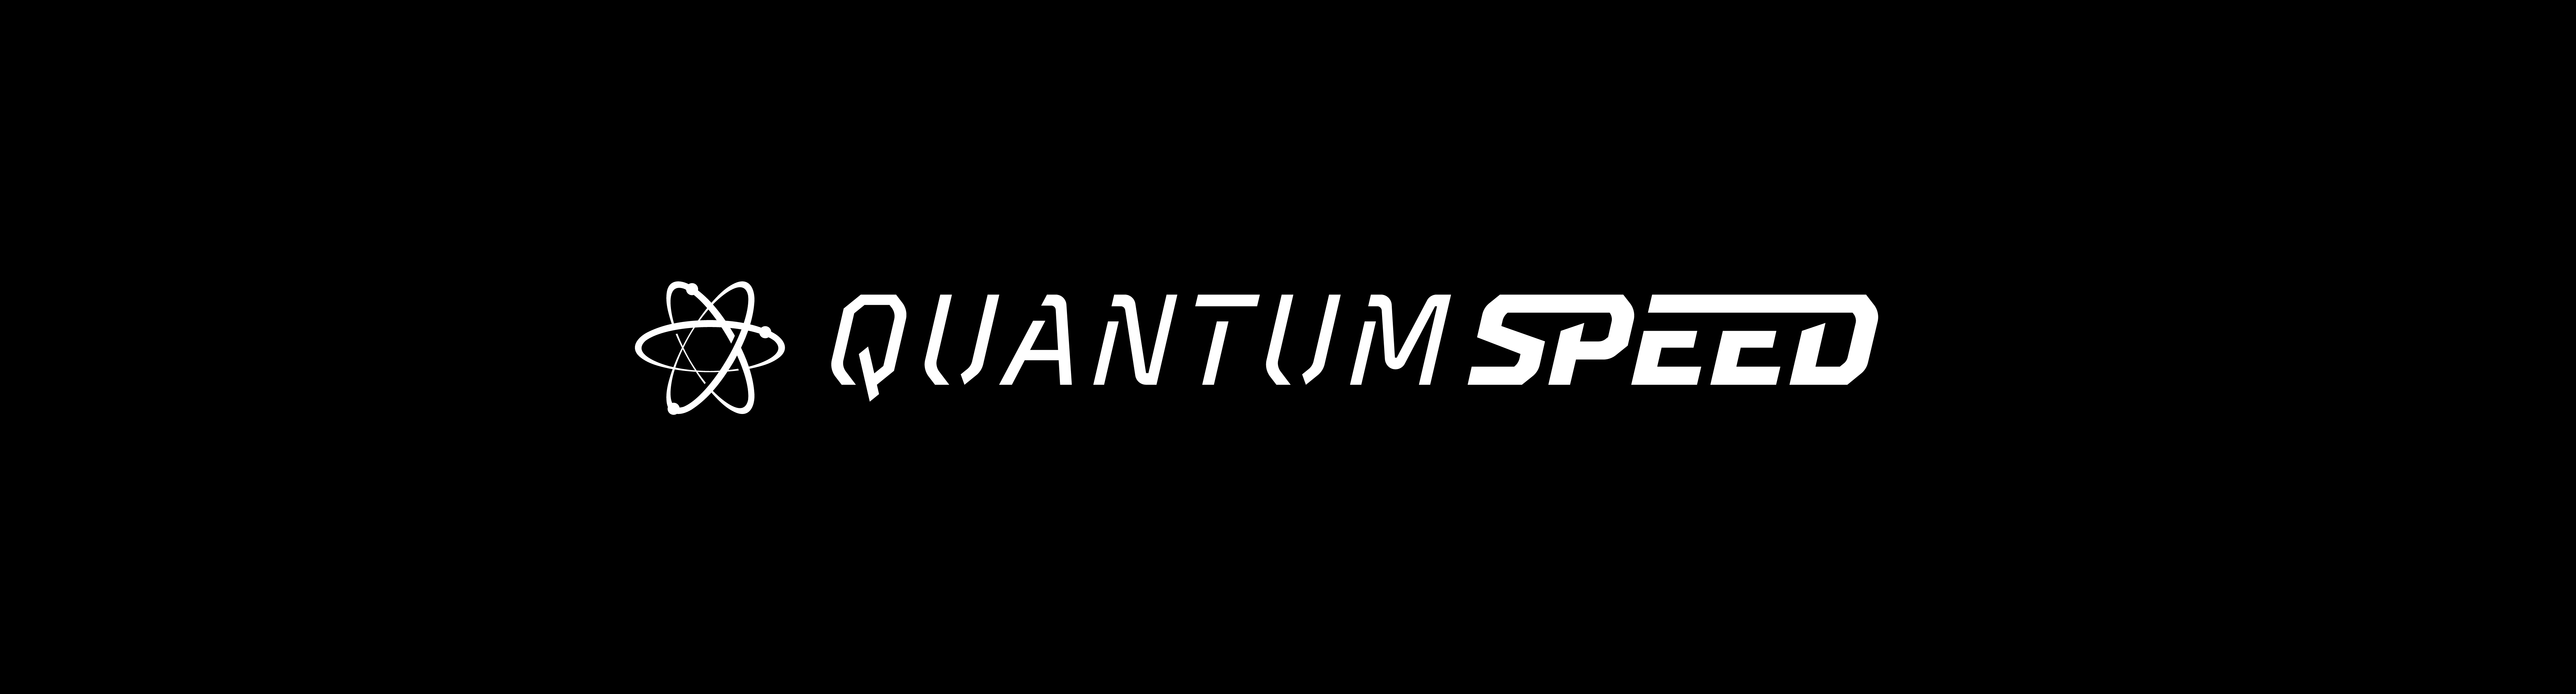 Phenom Elite Launches Game-Changing Quantum Speed Cleats, Redefining Athletic Performance on the Field